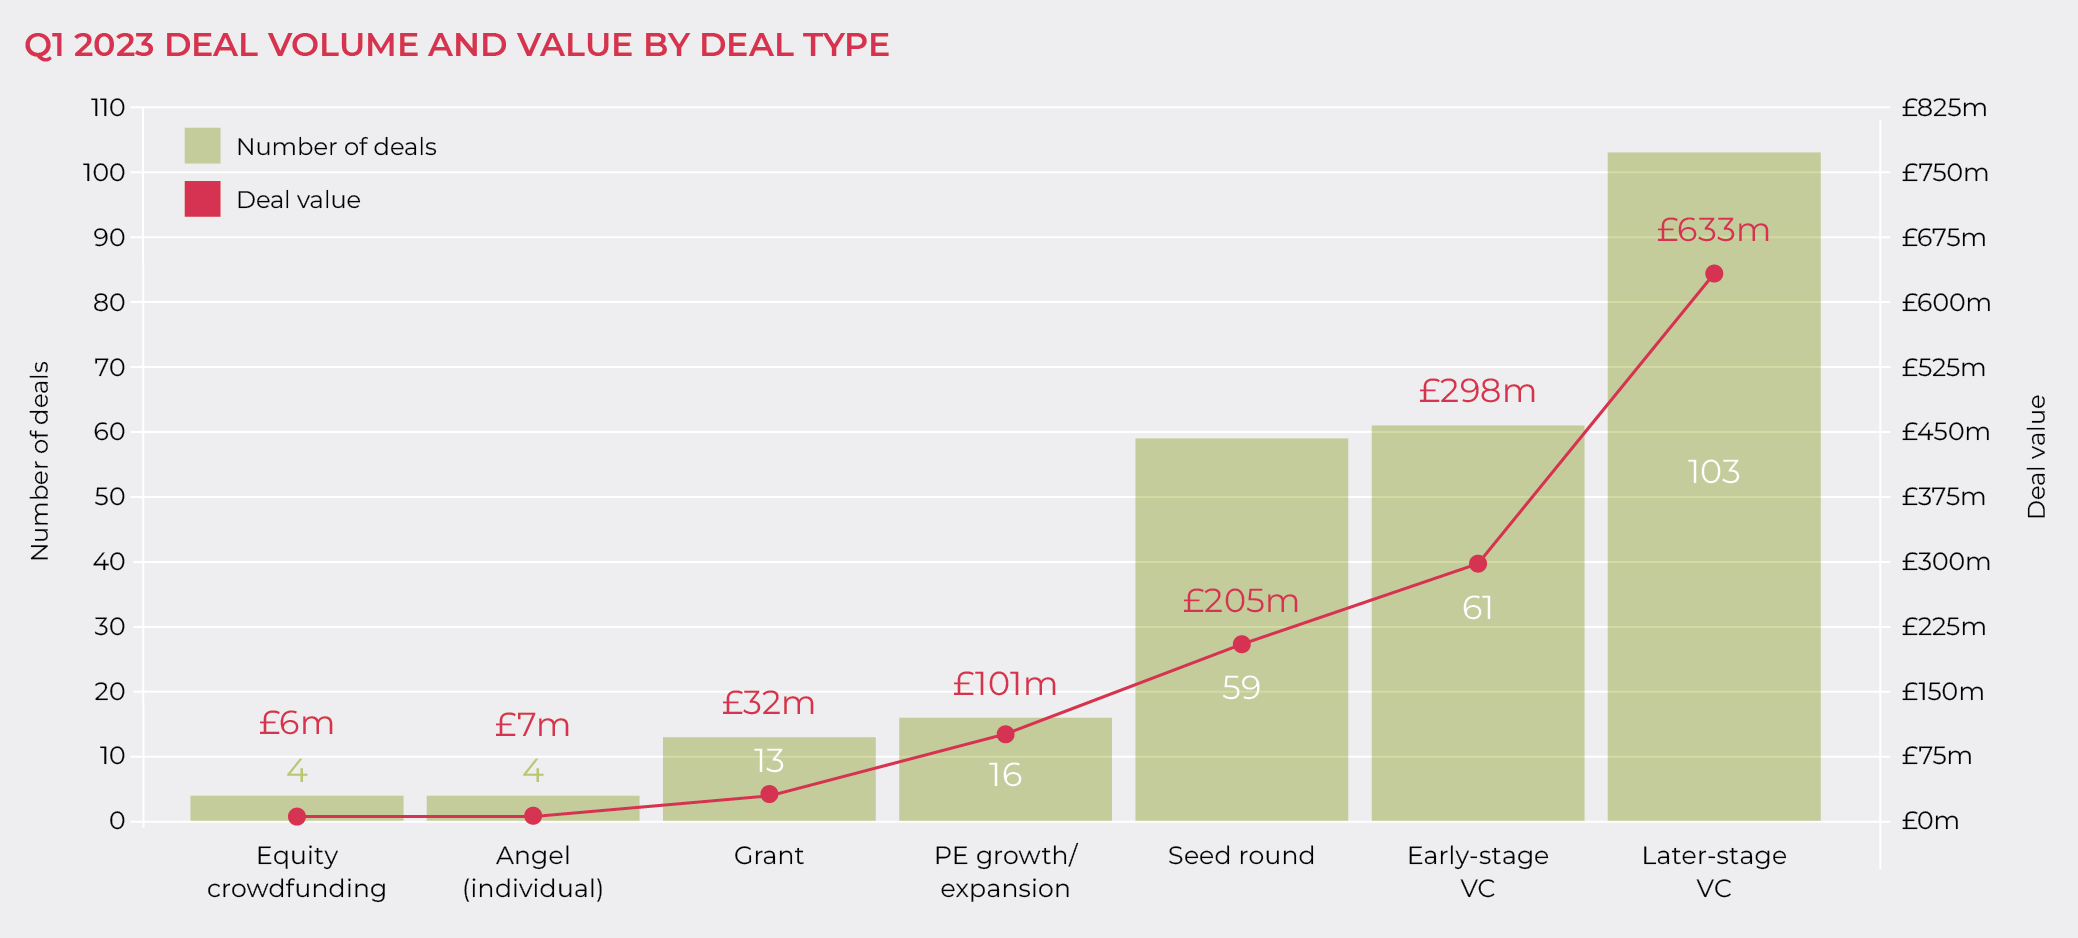 Q1 2023 DEAL VOLUME AND VALUE BY DEAL TYPE